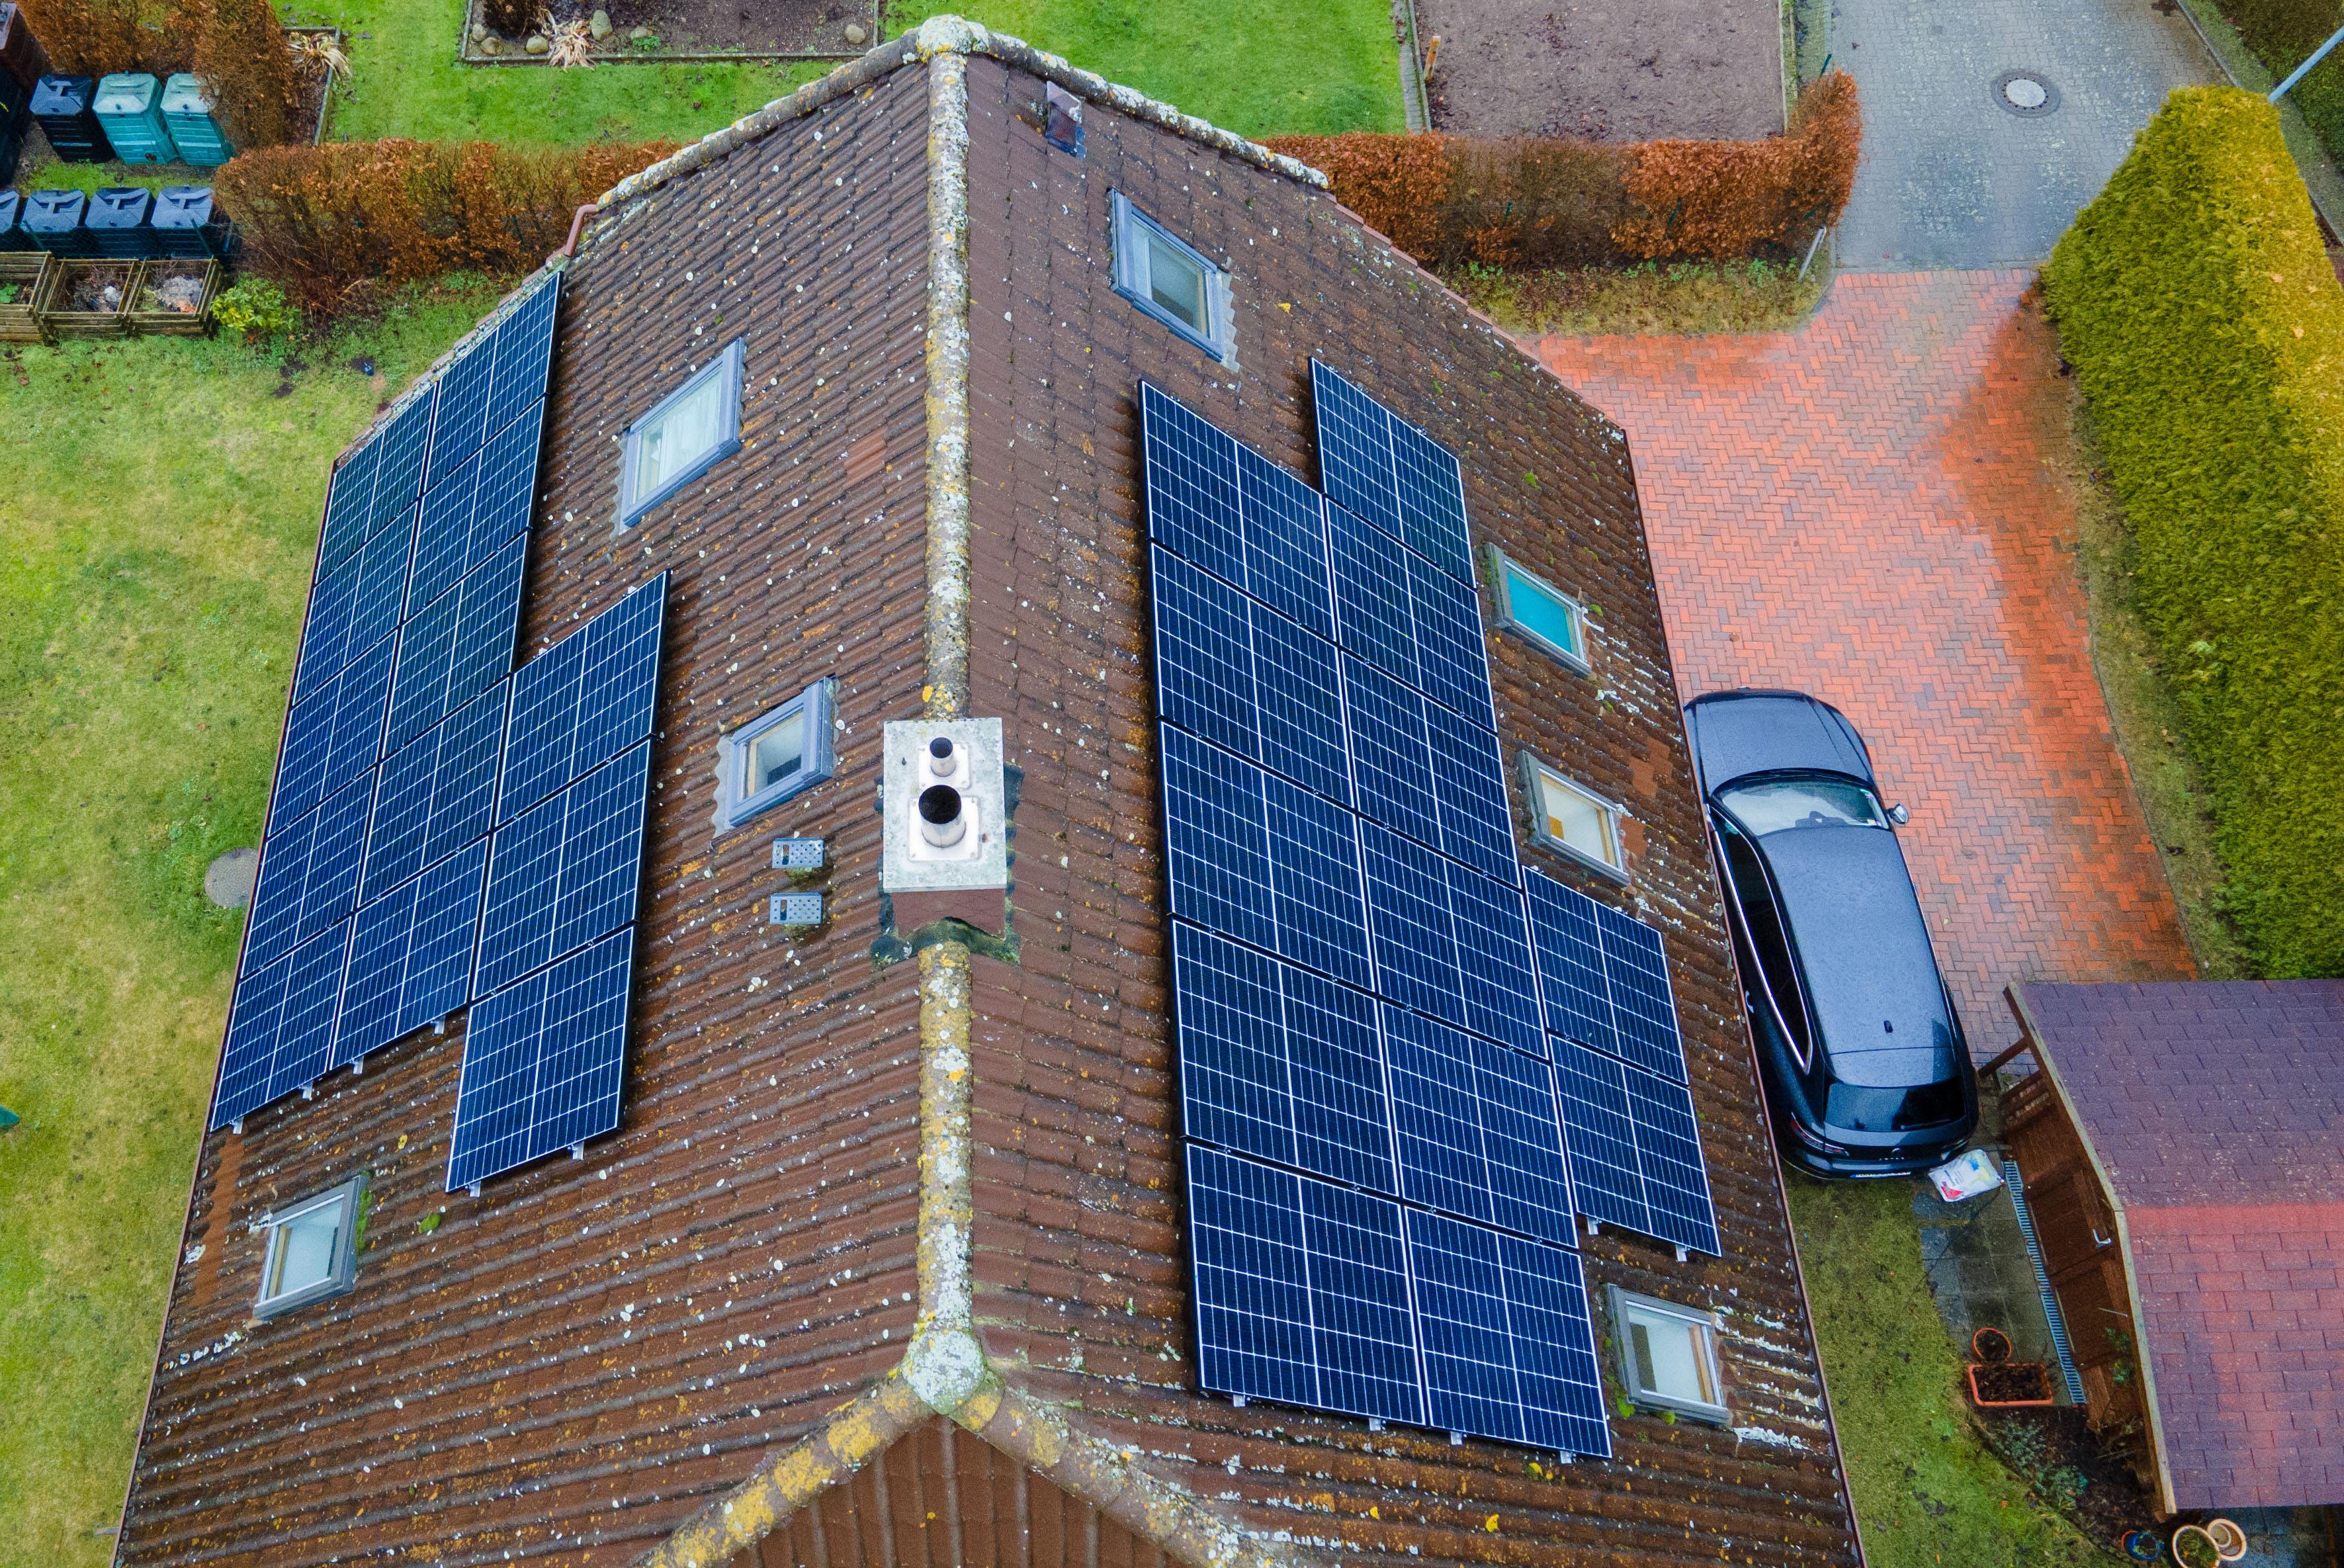 The roof of a house with solar panels, viewed from above.